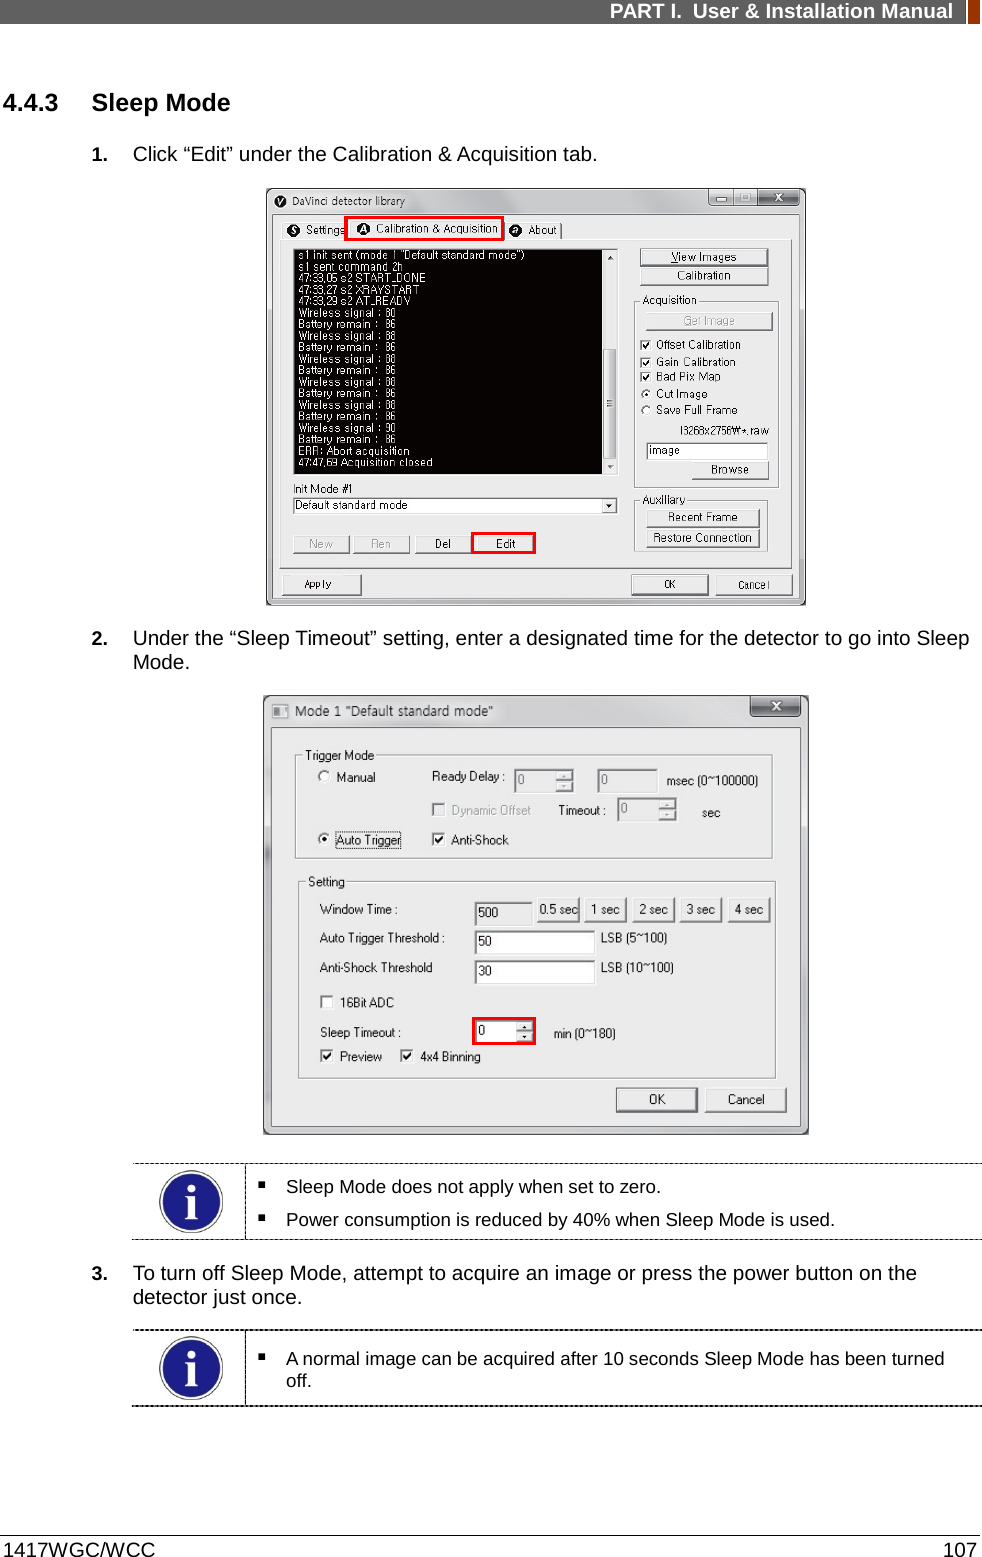 PART I. User &amp; Installation Manual  1417WGC/WCC 107 4.4.3 Sleep Mode 1. Click “Edit” under the Calibration &amp; Acquisition tab.  2. Under the “Sleep Timeout” setting, enter a designated time for the detector to go into Sleep Mode.     Sleep Mode does not apply when set to zero.  Power consumption is reduced by 40% when Sleep Mode is used. 3. To turn off Sleep Mode, attempt to acquire an image or press the power button on the detector just once.   A normal image can be acquired after 10 seconds Sleep Mode has been turned off. 